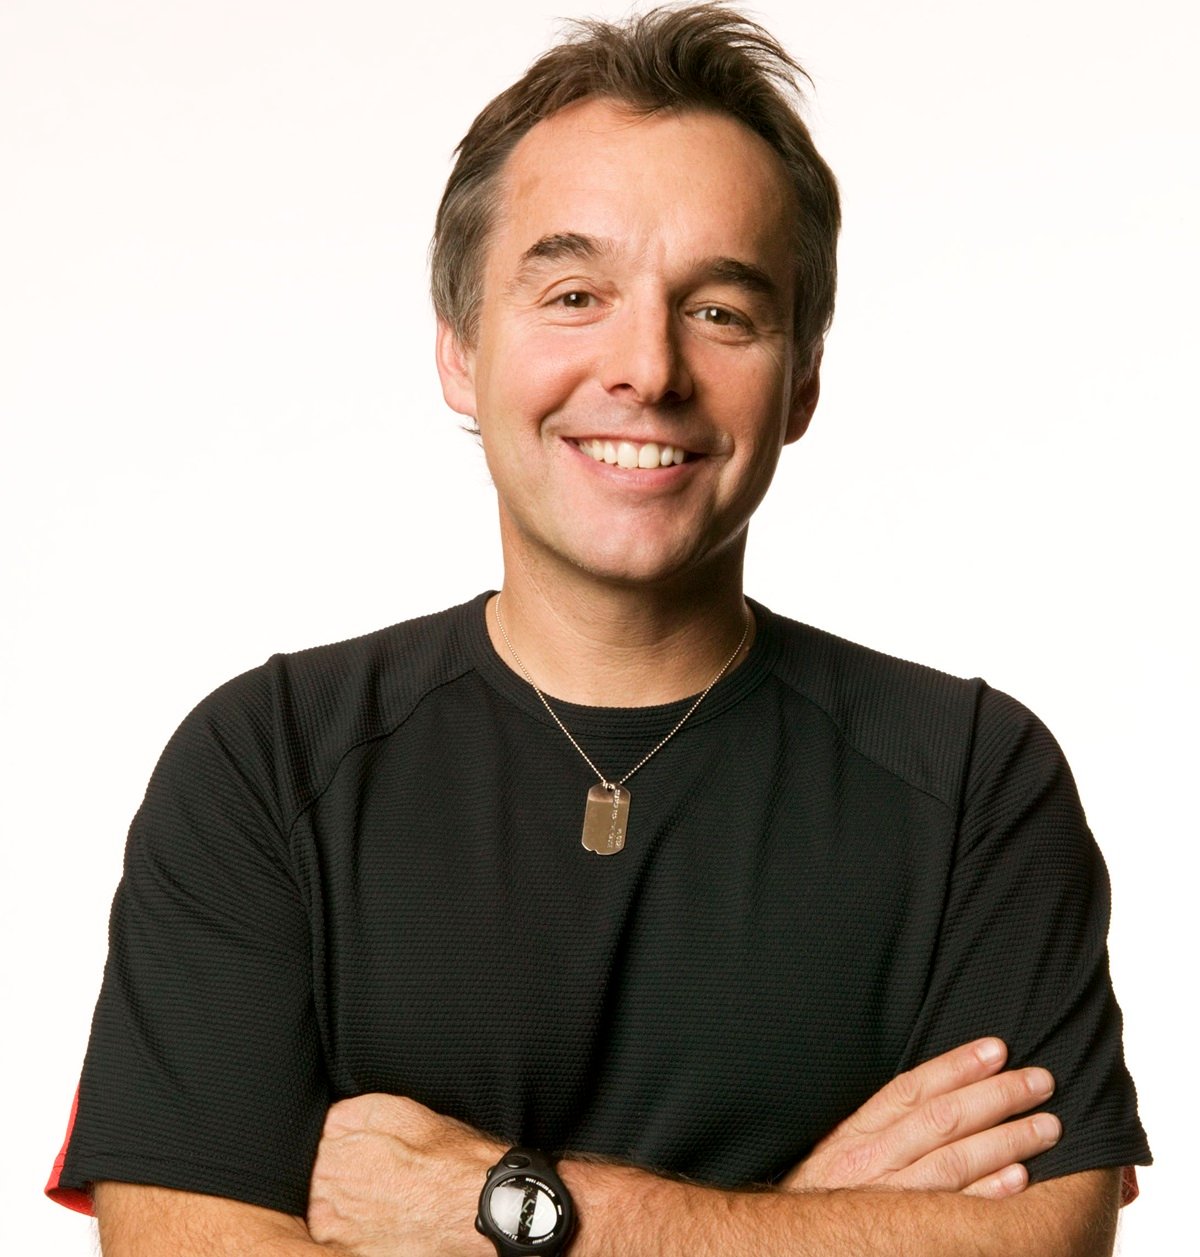 Chris Columbus in a promotional portrait for the Search for the Cause campaign